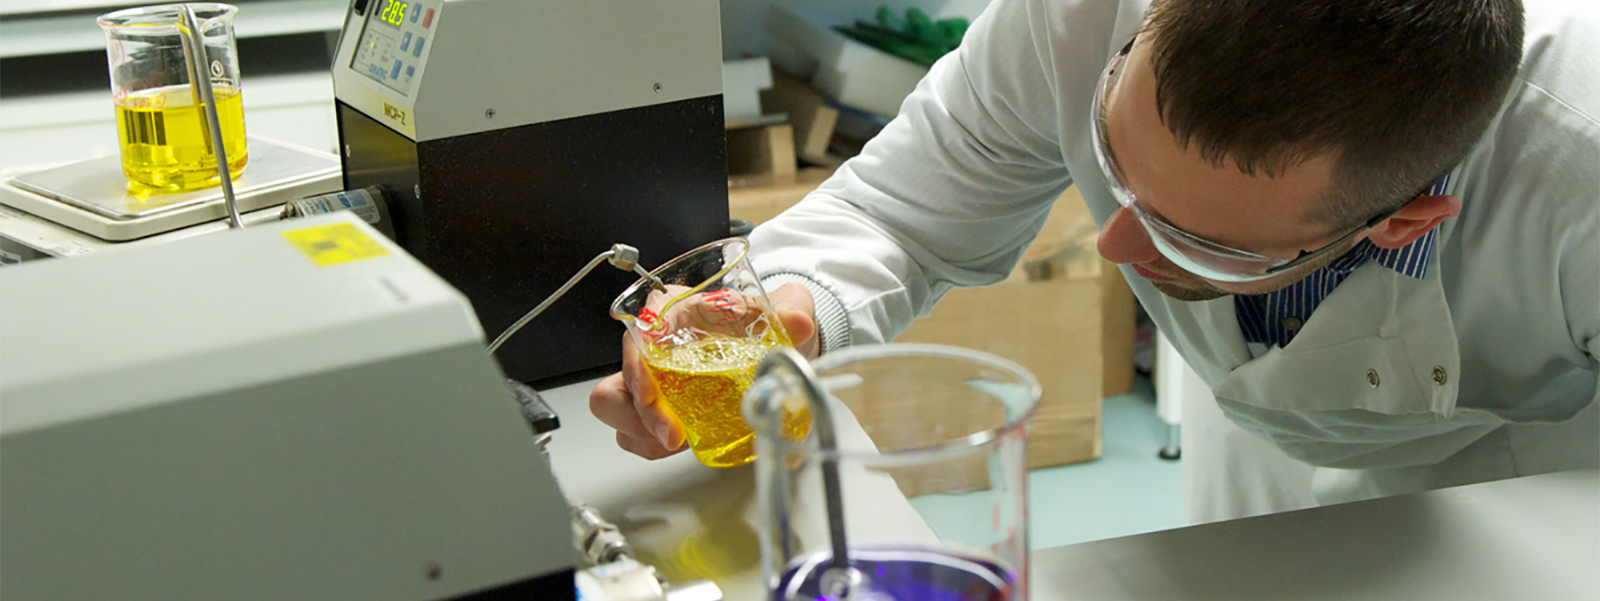 Researcher in a pharmacy lab